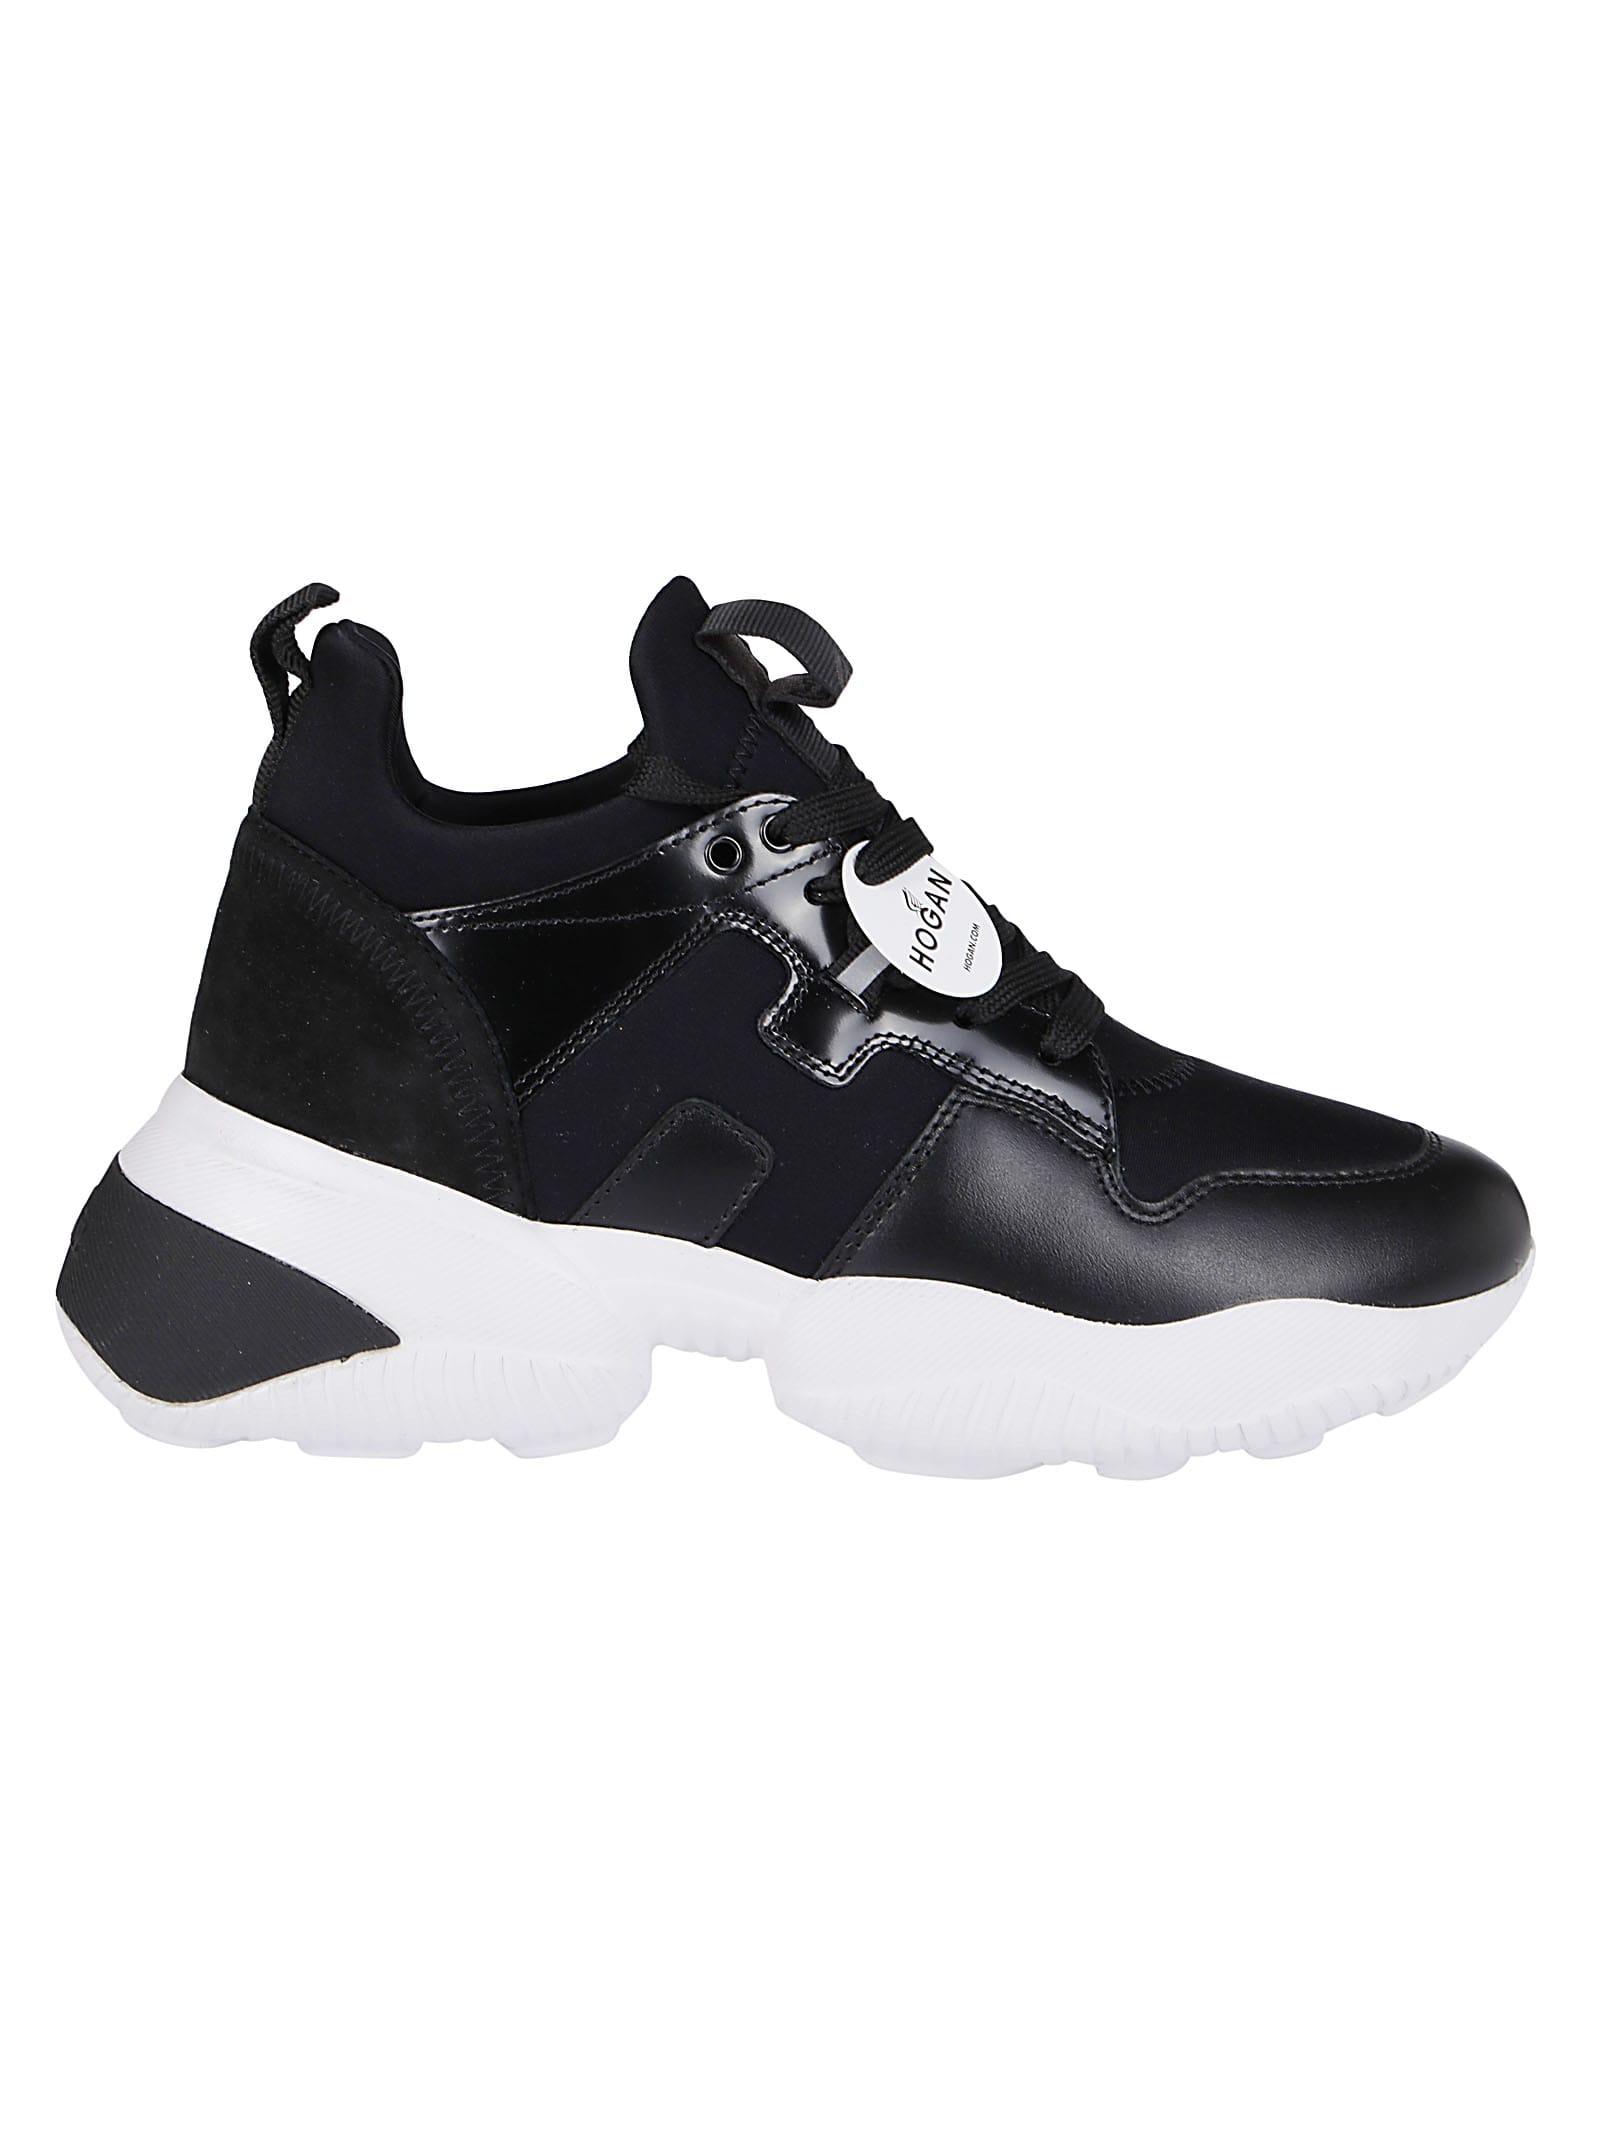 Hogan Black Leather Interaction Sneakers